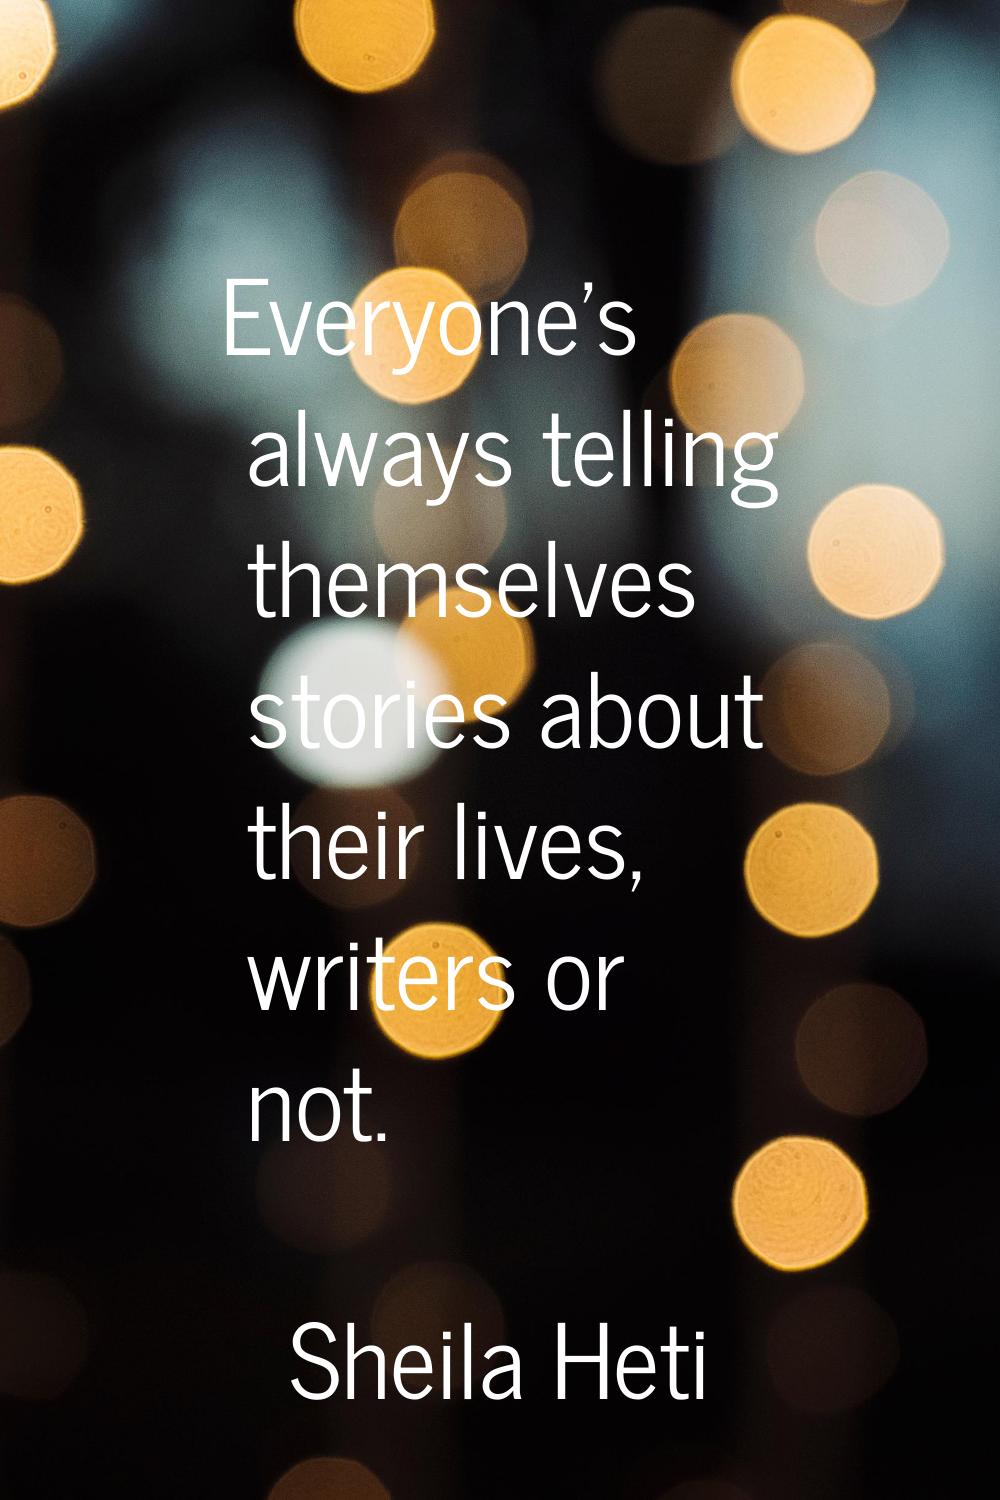 Everyone's always telling themselves stories about their lives, writers or not.